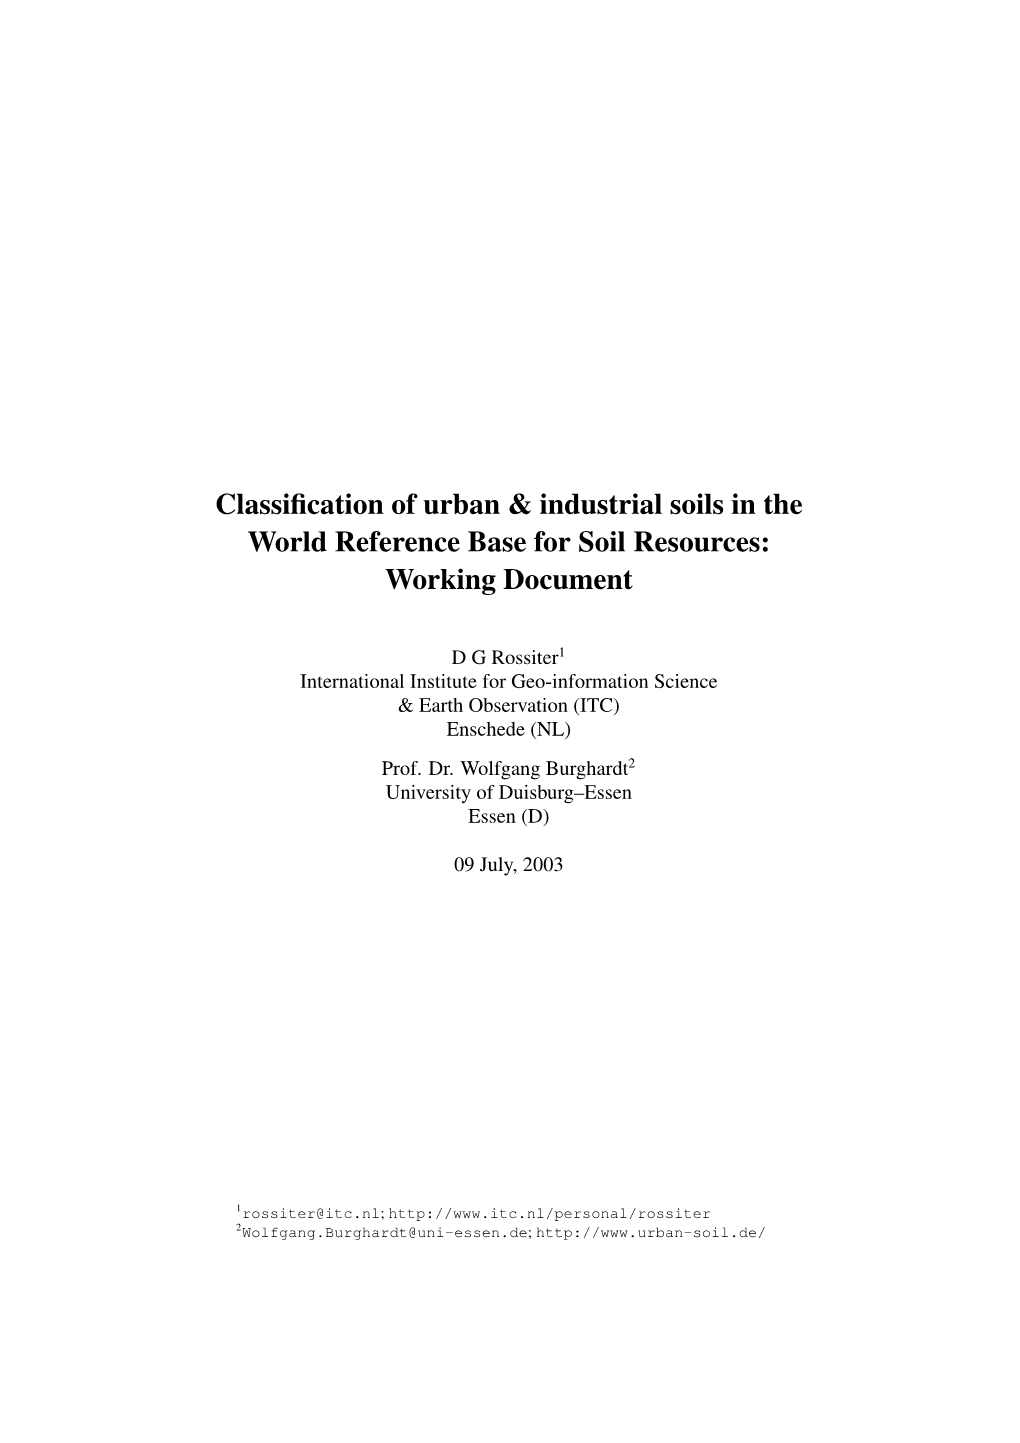 Classification of Urban & Industrial Soils in the World Reference Base